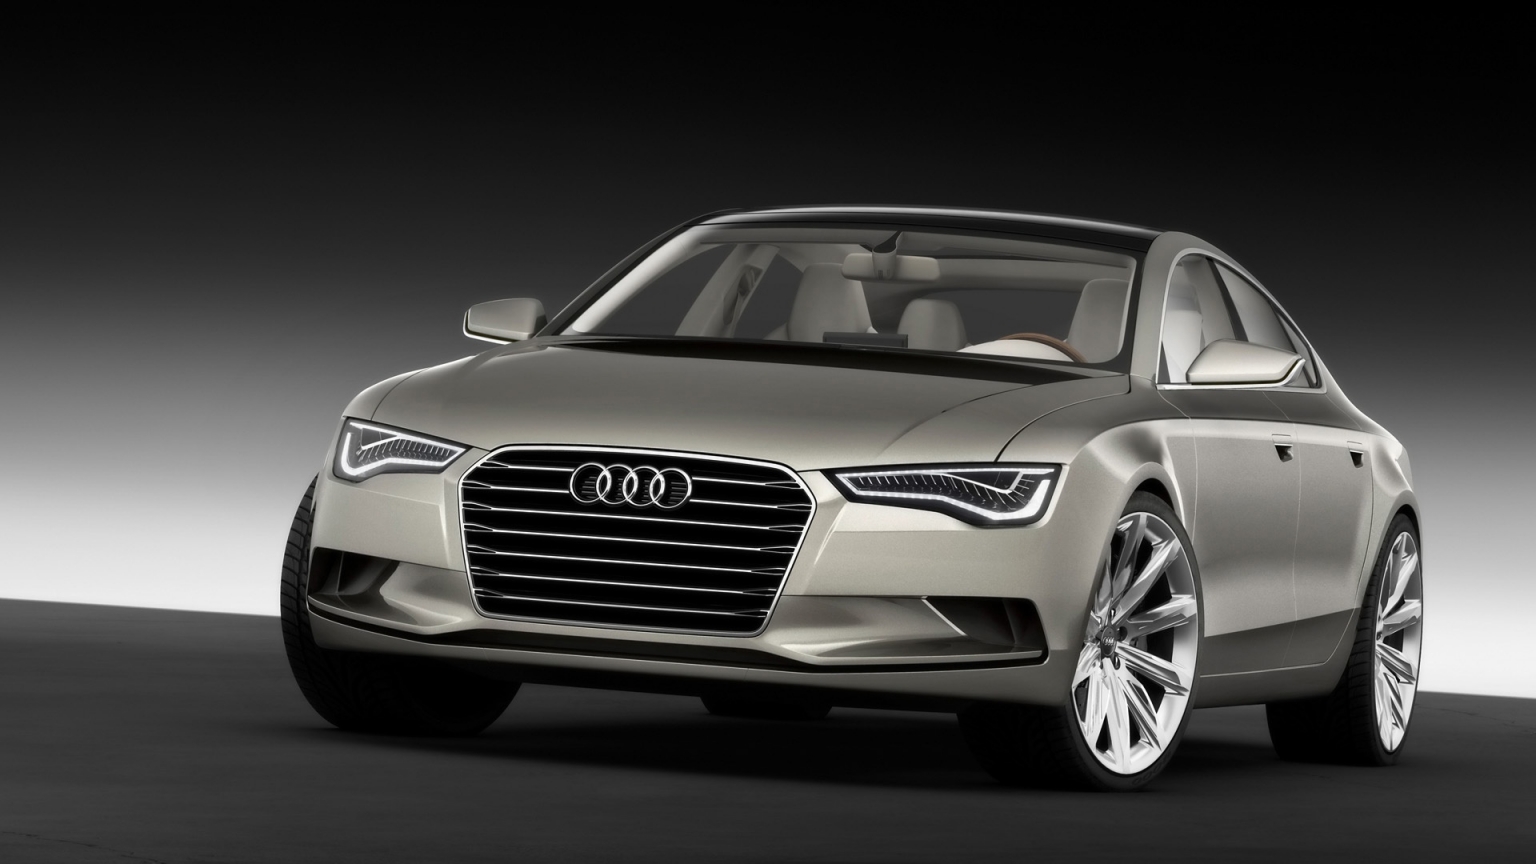 2009 Audi Sportback Concept - Front Angle for 1536 x 864 HDTV resolution